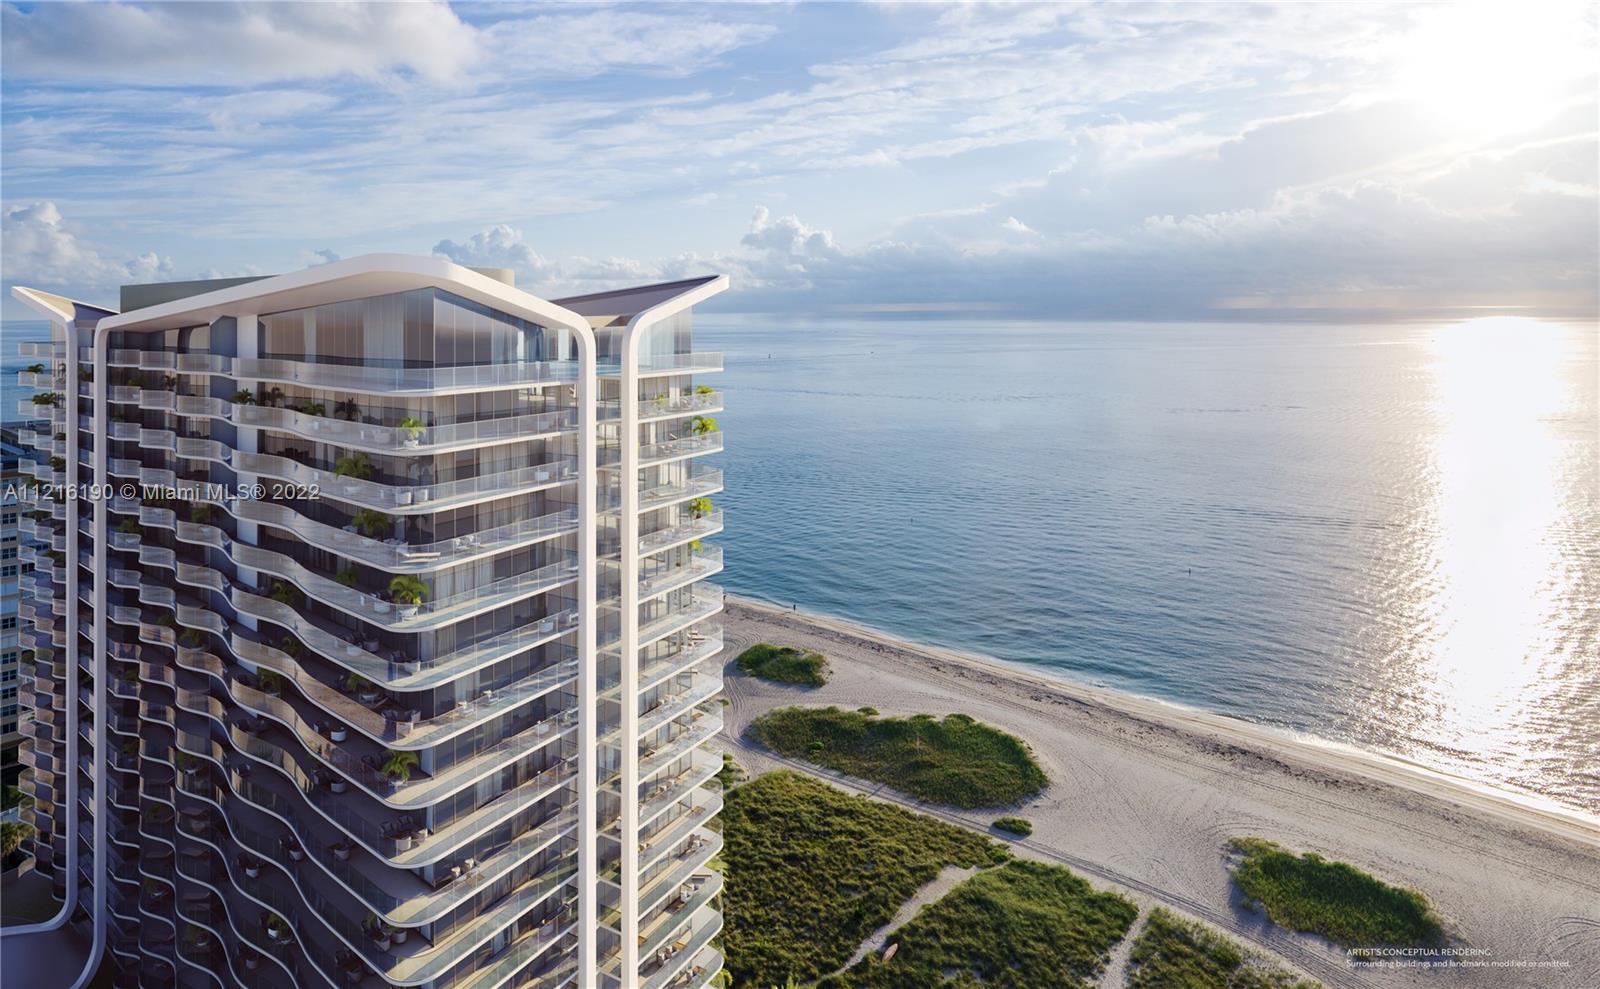 Located on 283 linear feet of pristine oceanfront, Related Group's newest preconstruction property, 